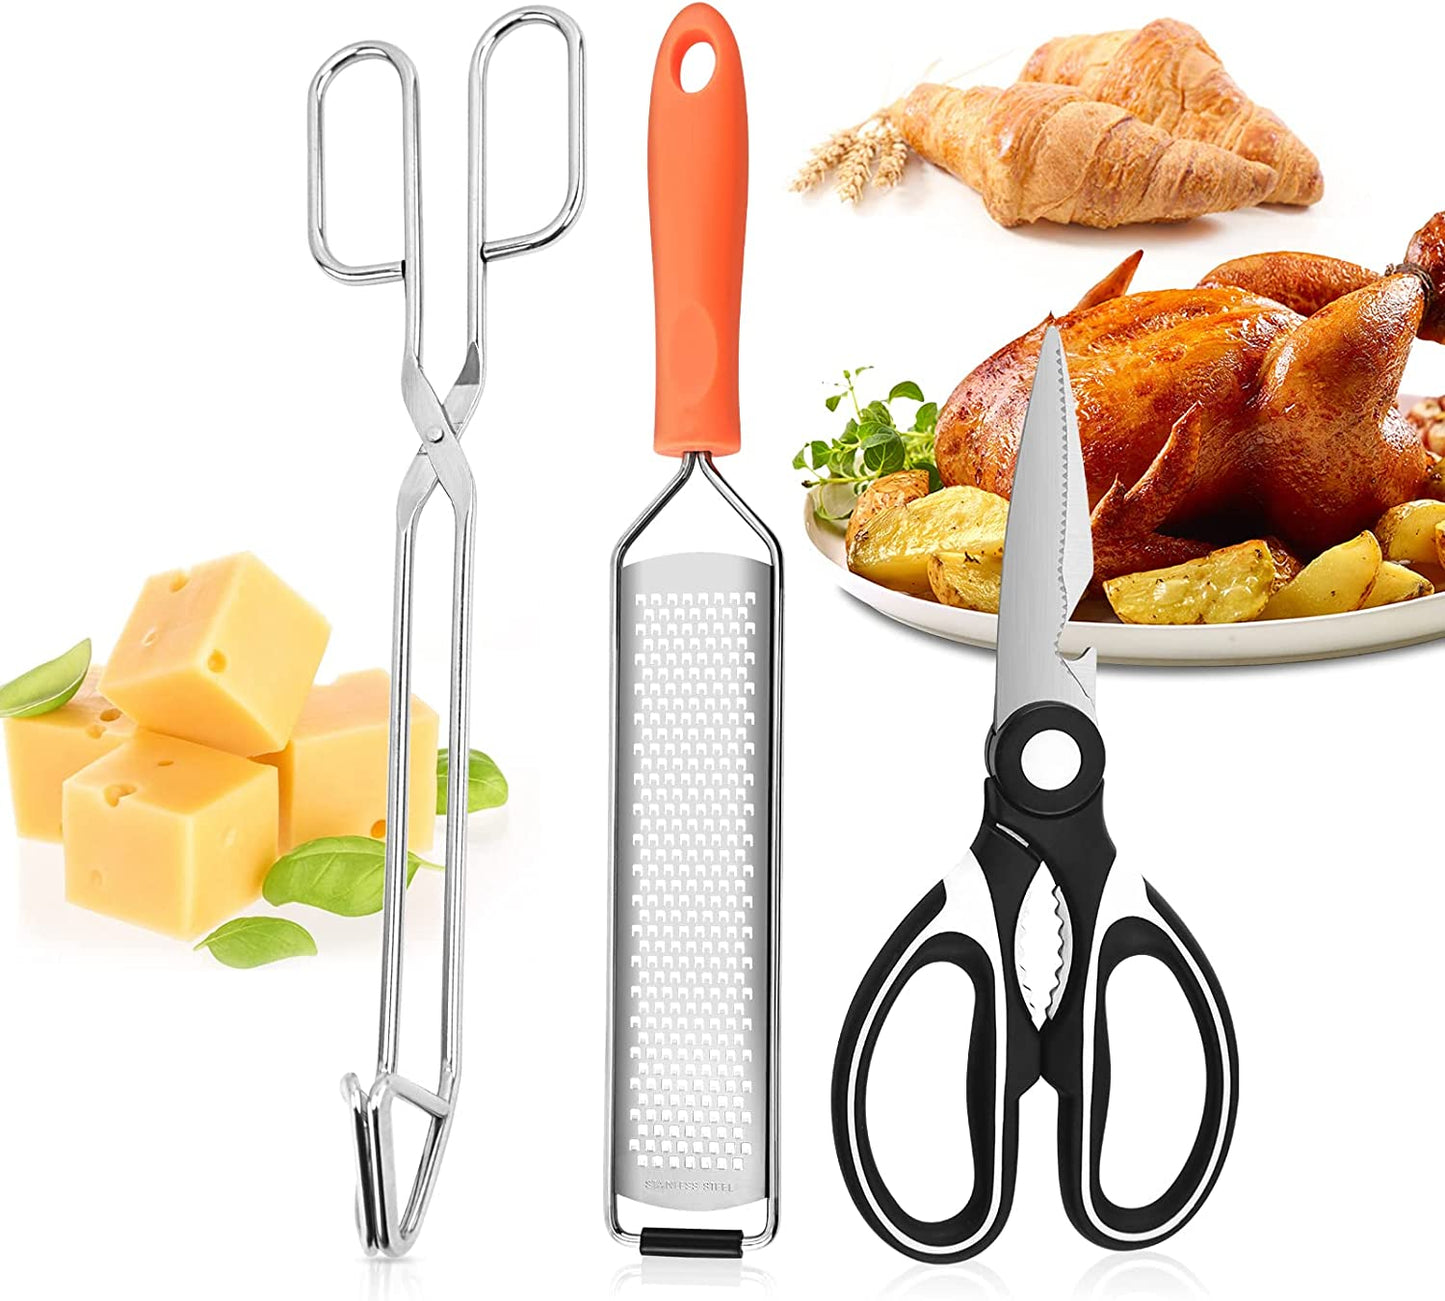 3Pack Kitchen Gadgets Utility Set - Kitchen Shears Poultry Scissor & Tongs for Cutting Meat Chicken Veggies, Cheese Grater Lemon Zester, All Purpose Kitchen Tools Gadgets Scissor Clip Zester Set  WGPG   